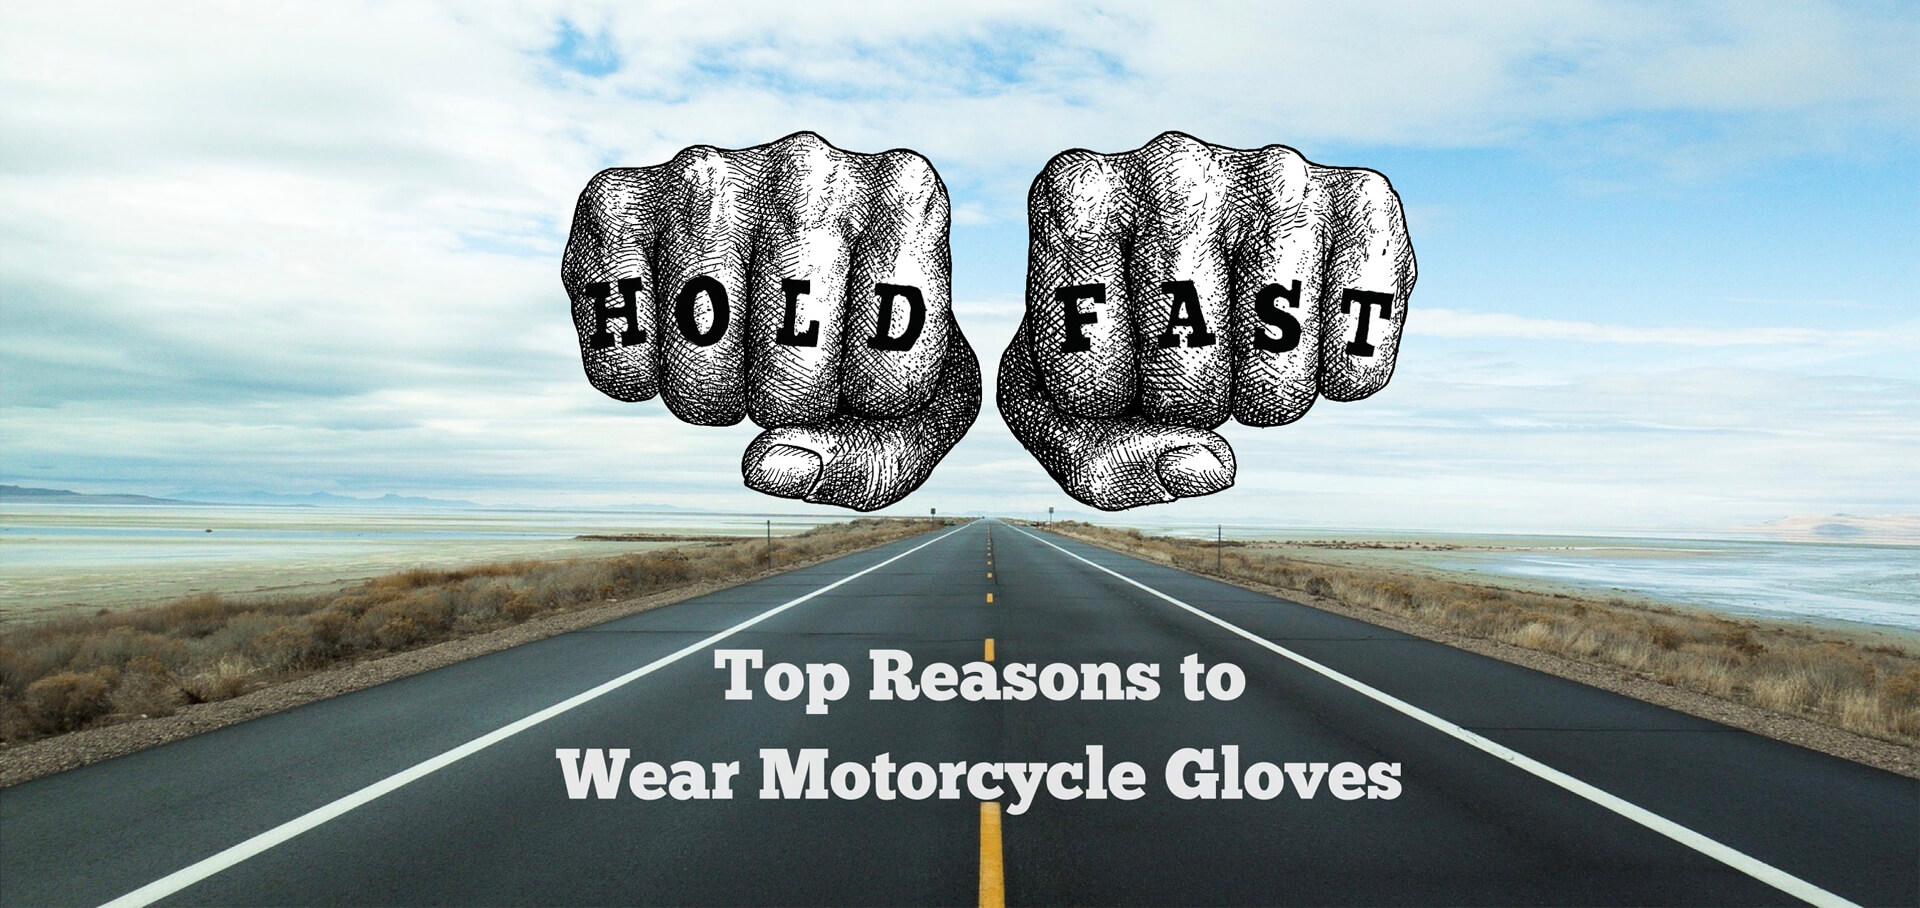 Top-Reasons-to-Wear-Motorcycle-gloves